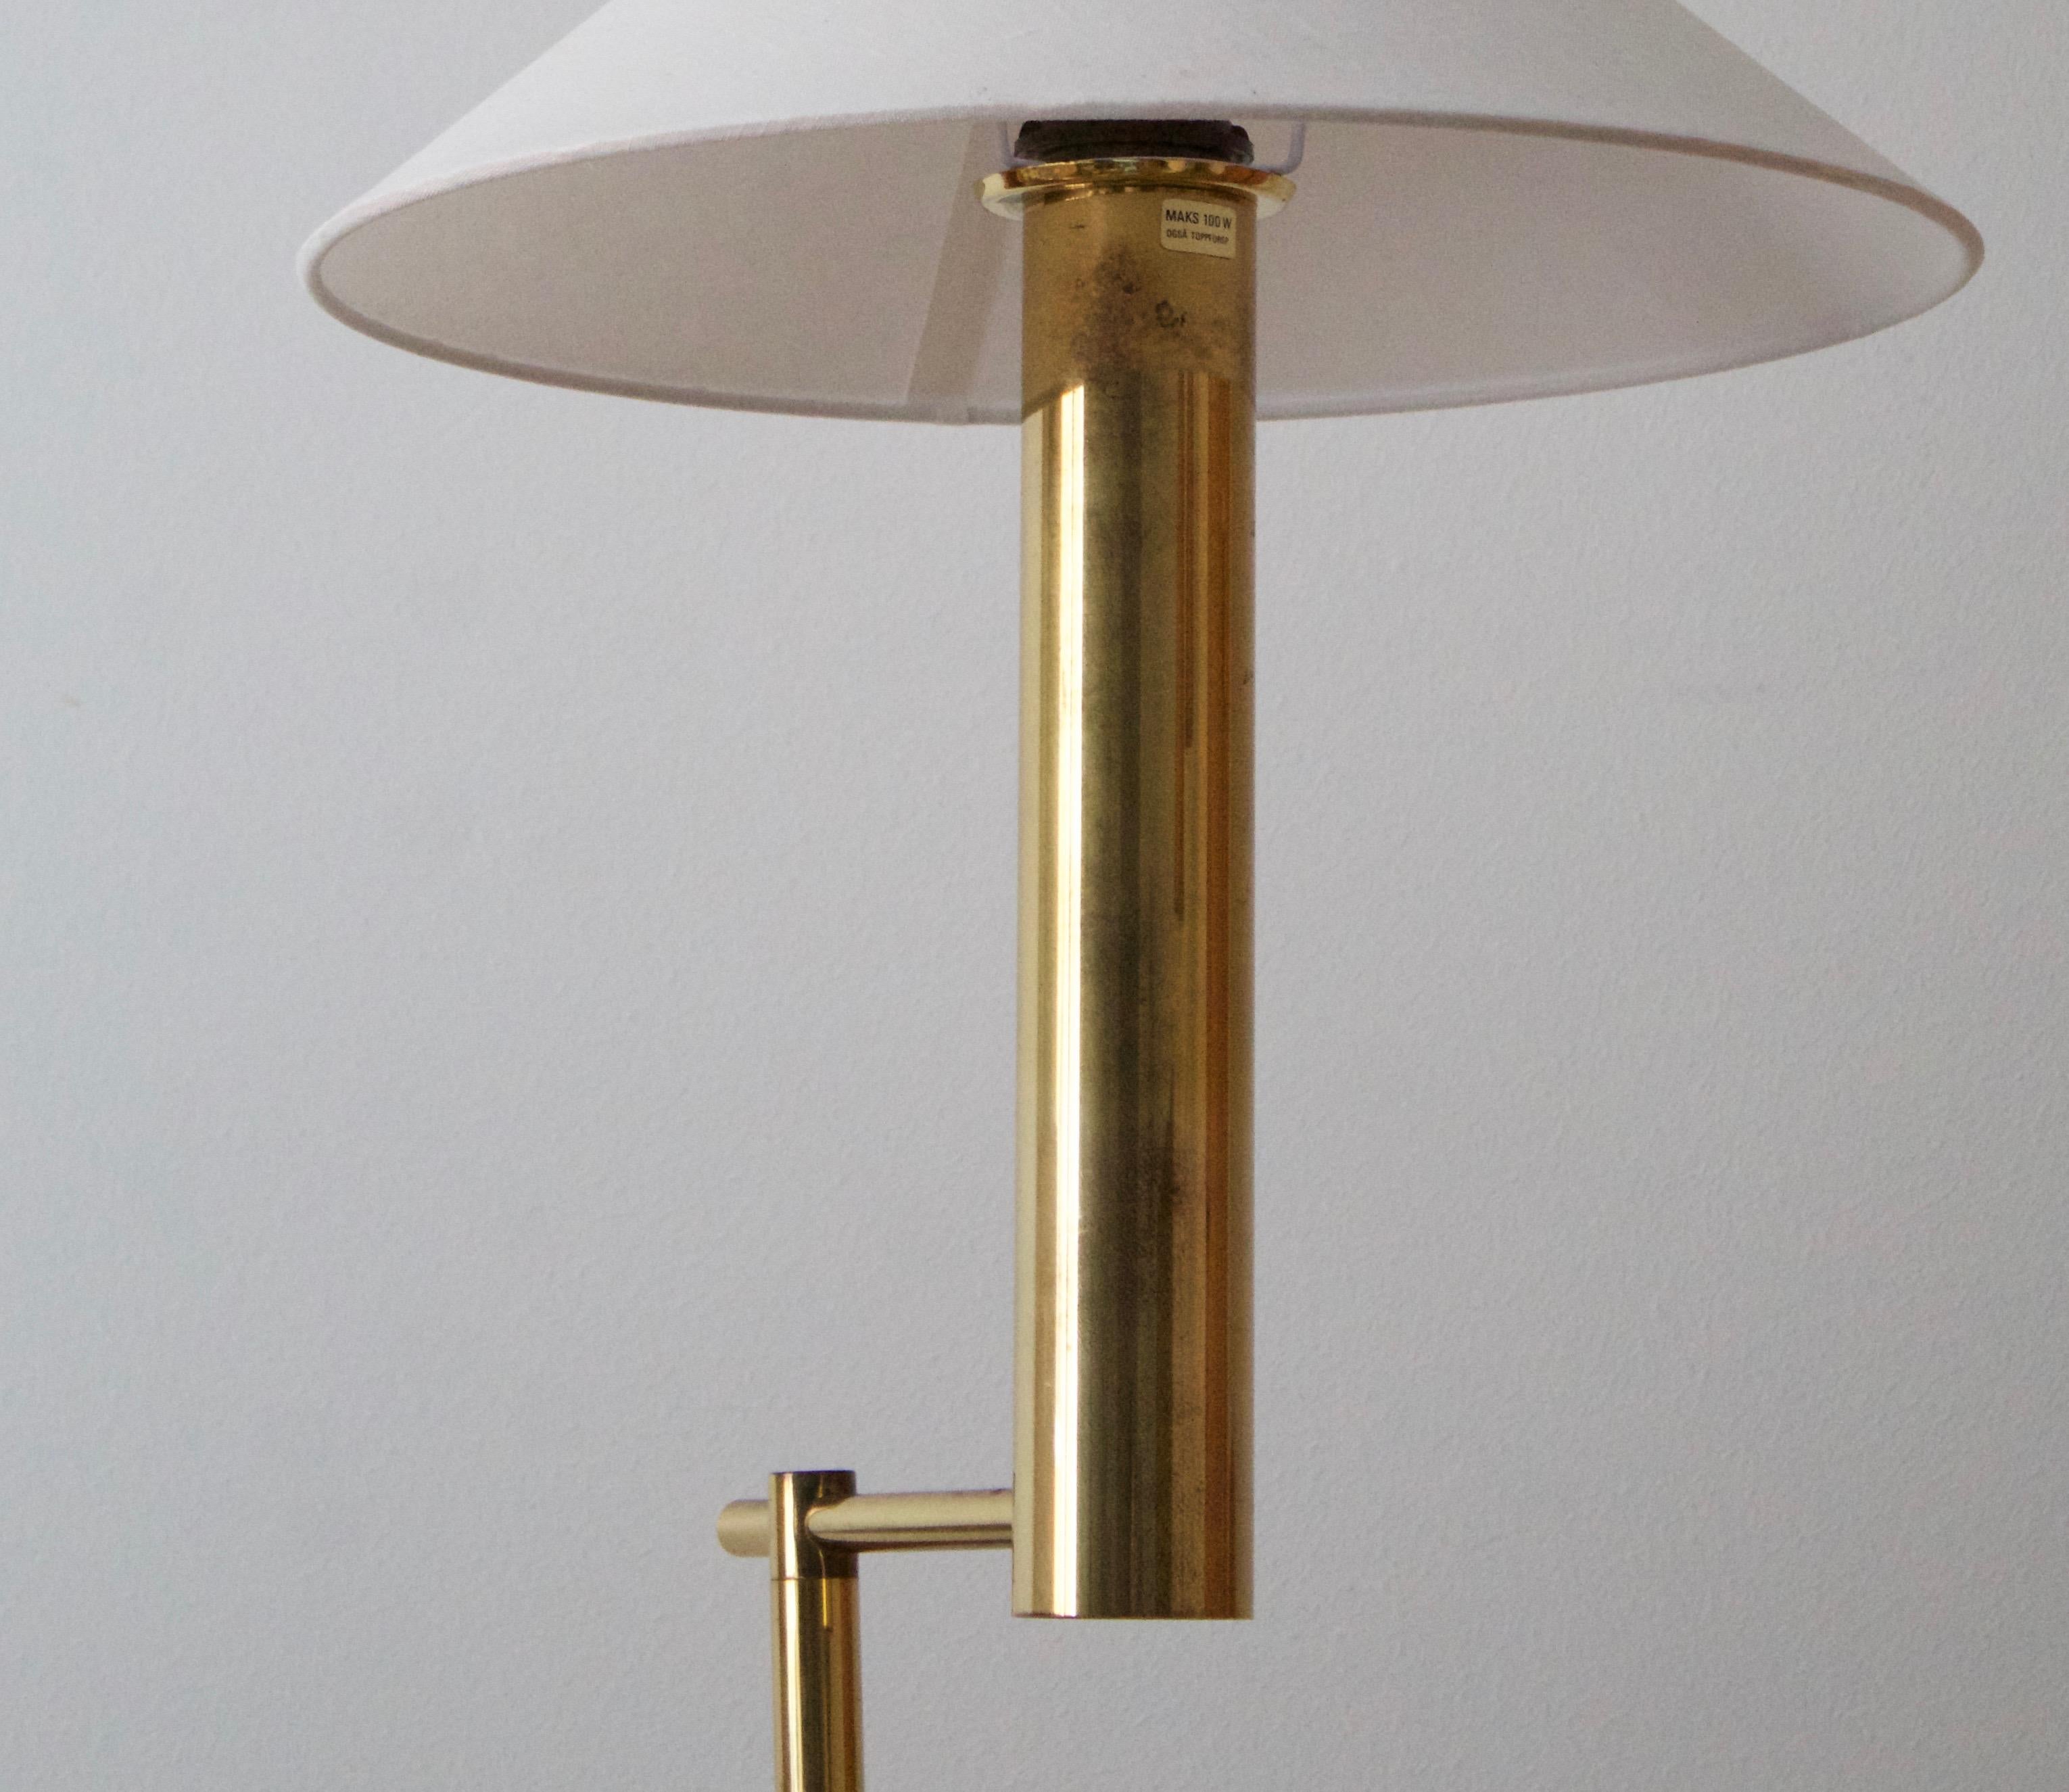 A floor lamp, designed and produced in Denmark, 1970s. Unknown designer and producer.